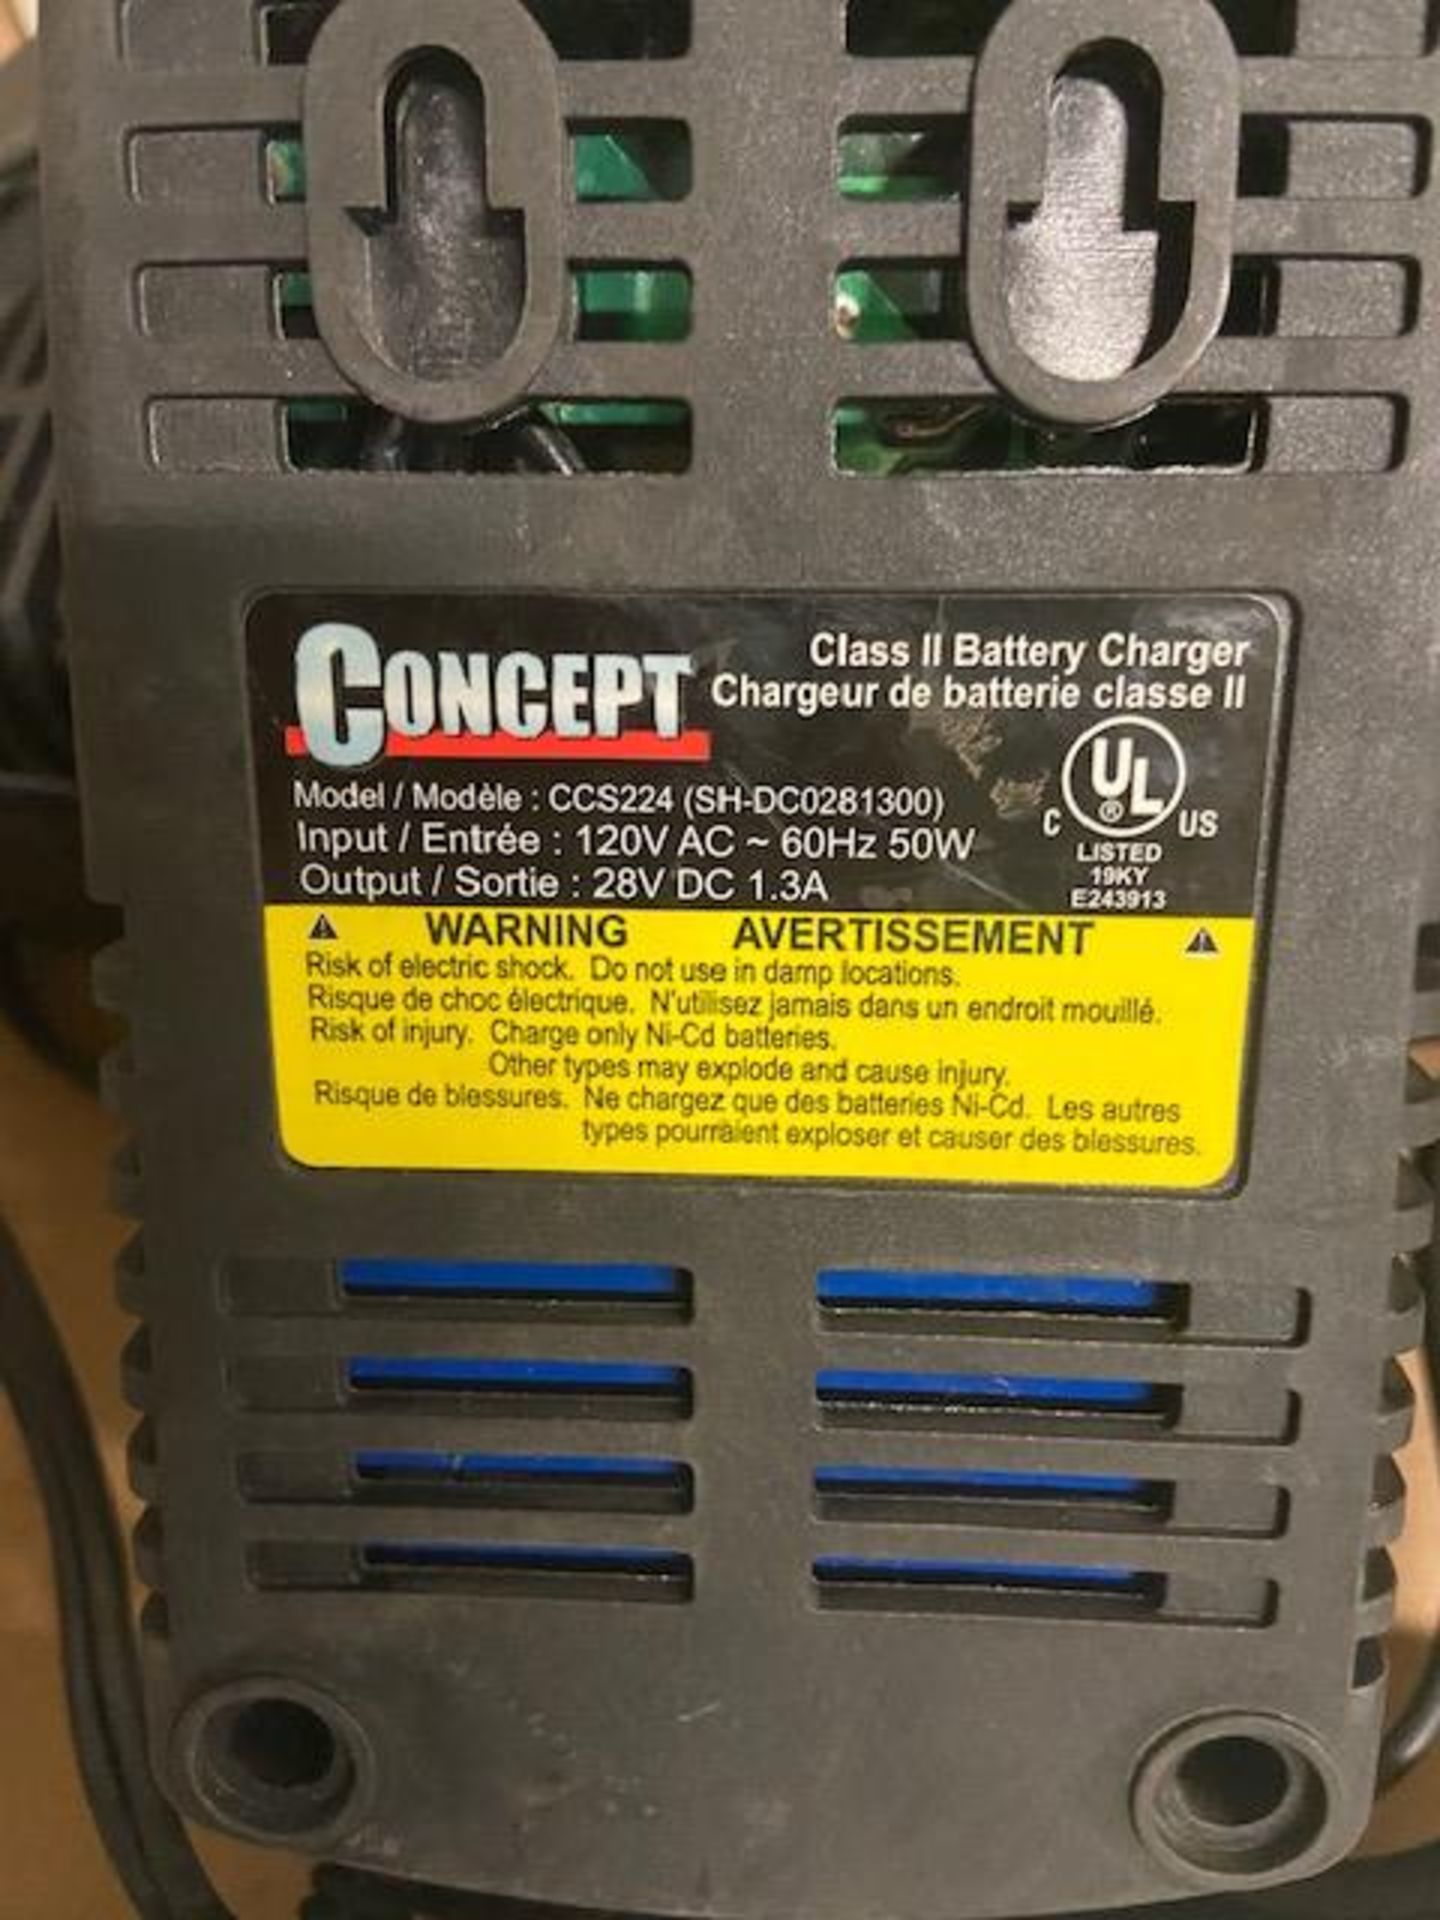 Lot of 2 Boxes of Battery Charger Units CONCEPT (6 units total) - Image 2 of 2